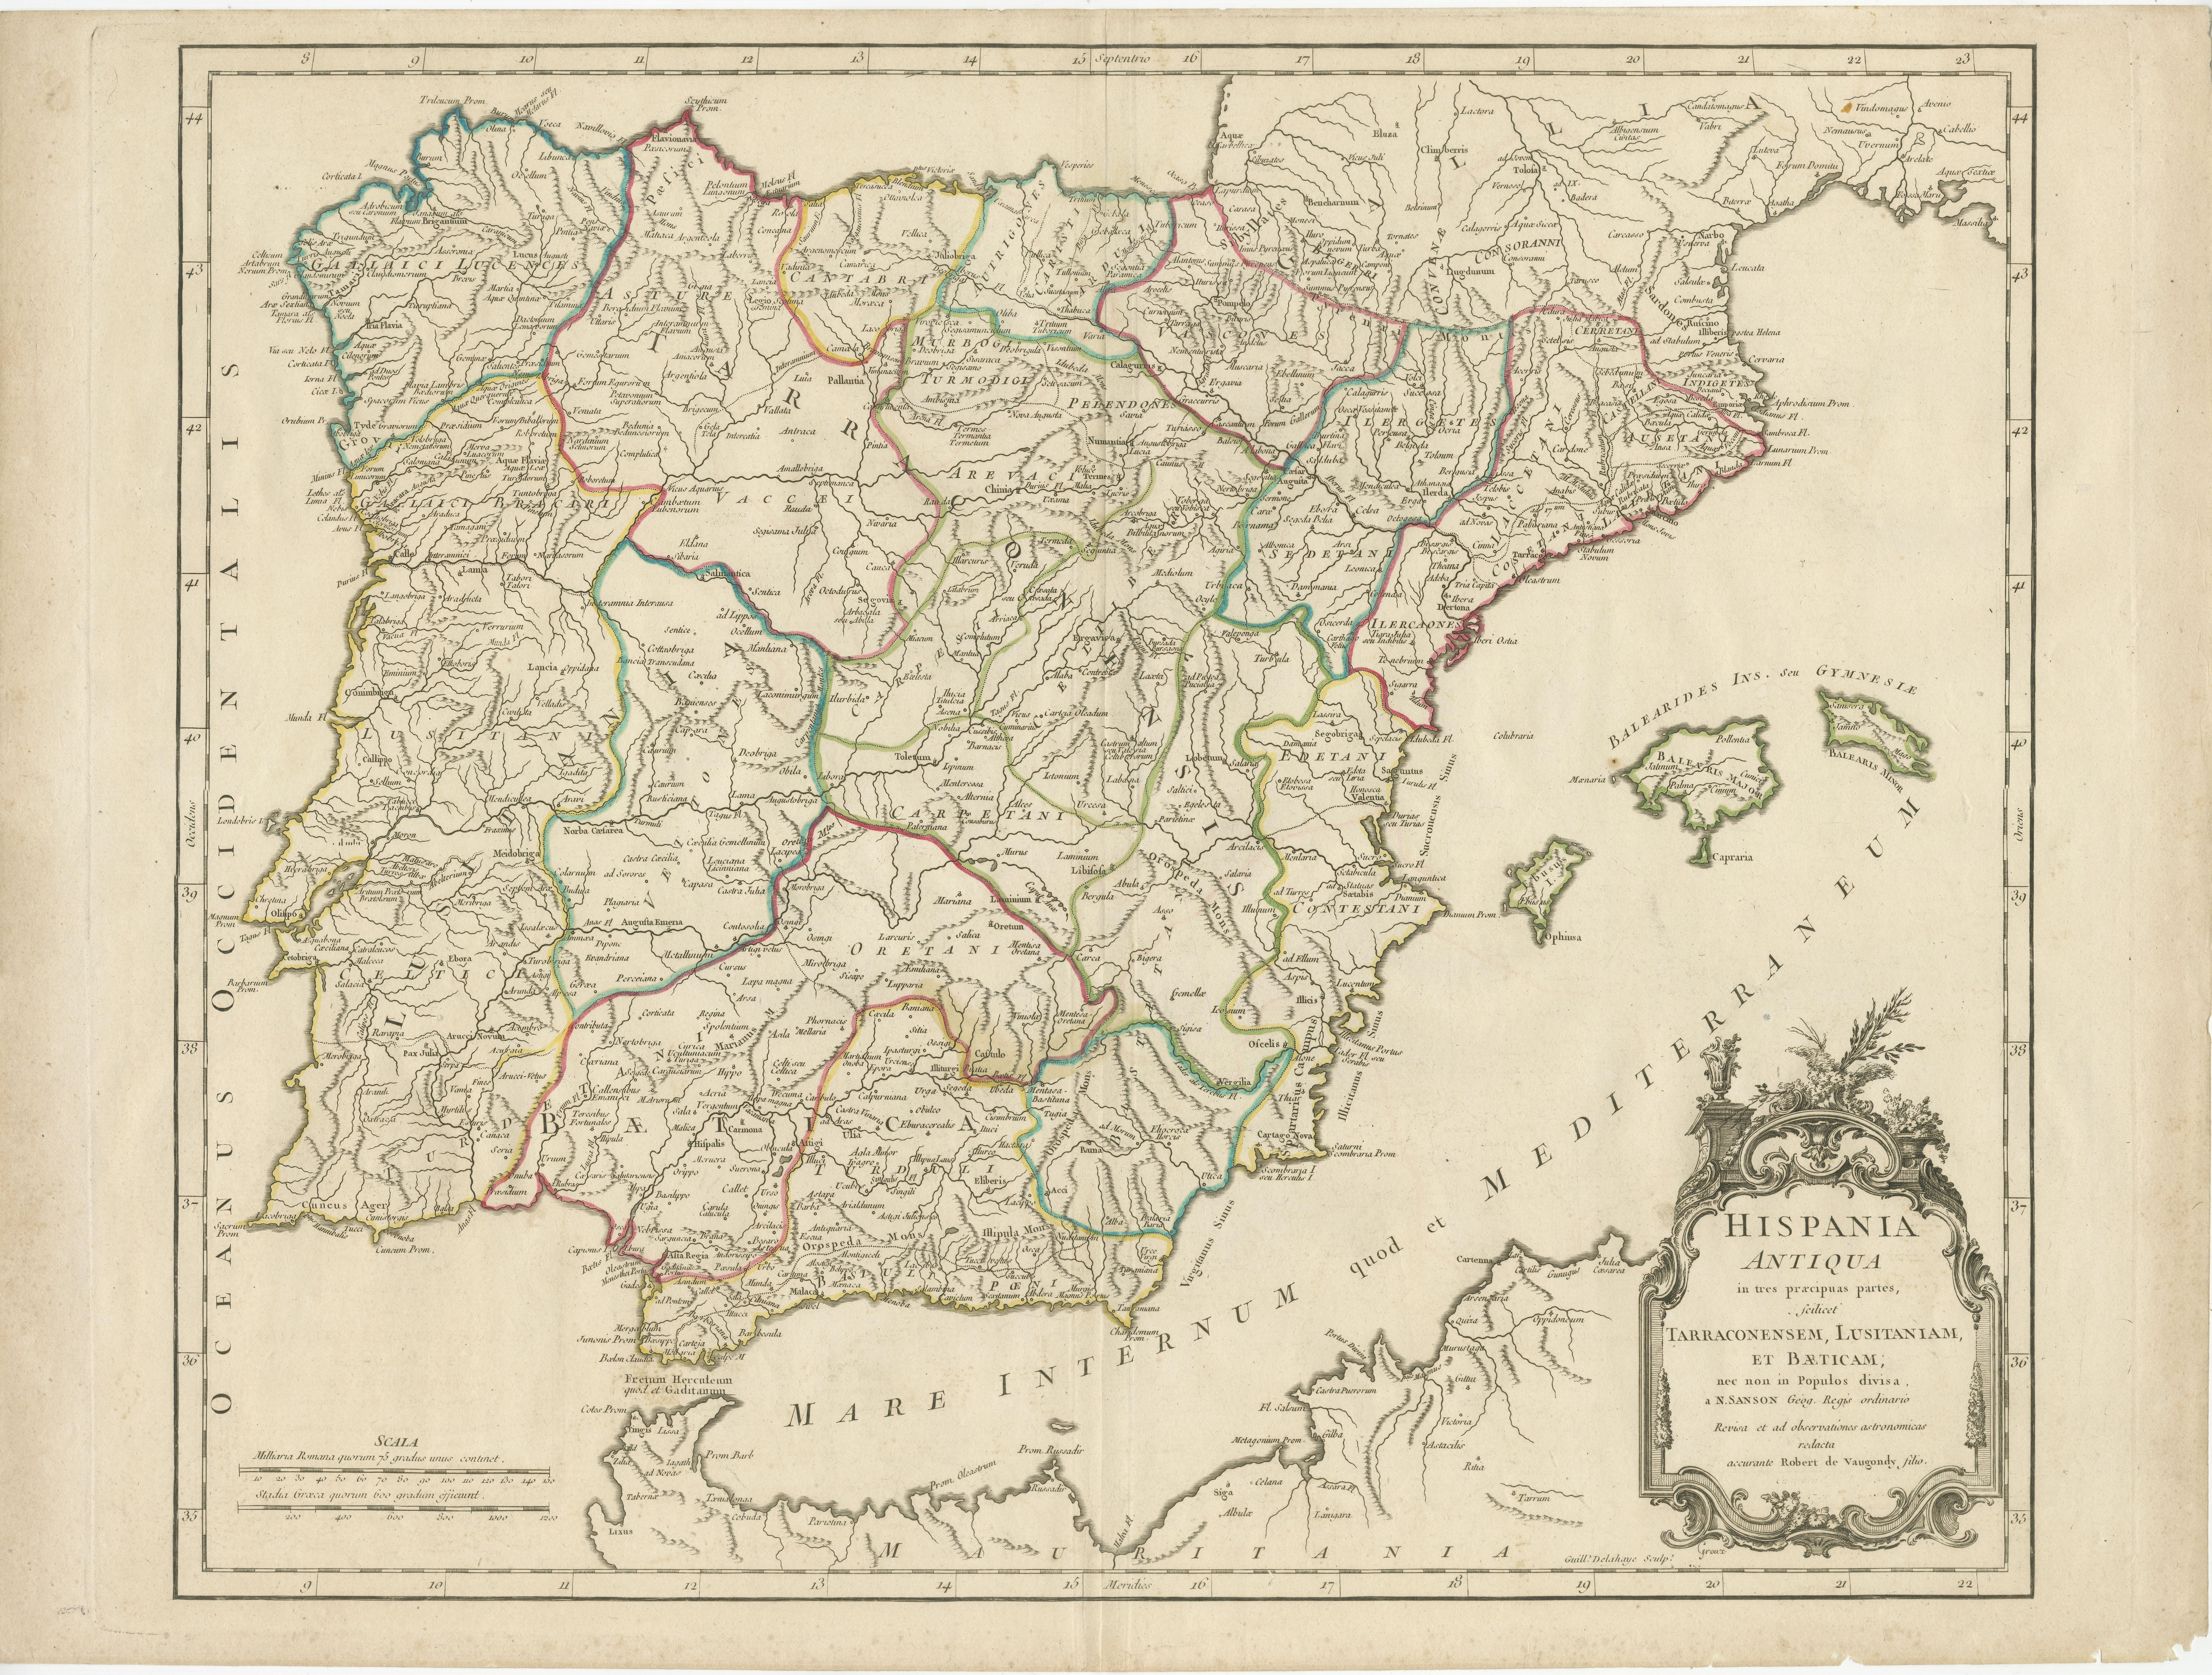 Antique map titled 'Hispania Antiqua (..)'. Map of ancient Spain and Portugal. Engraved by G. Delahaye. Published circa 1760, by or after Sanson & Vaugondy. 